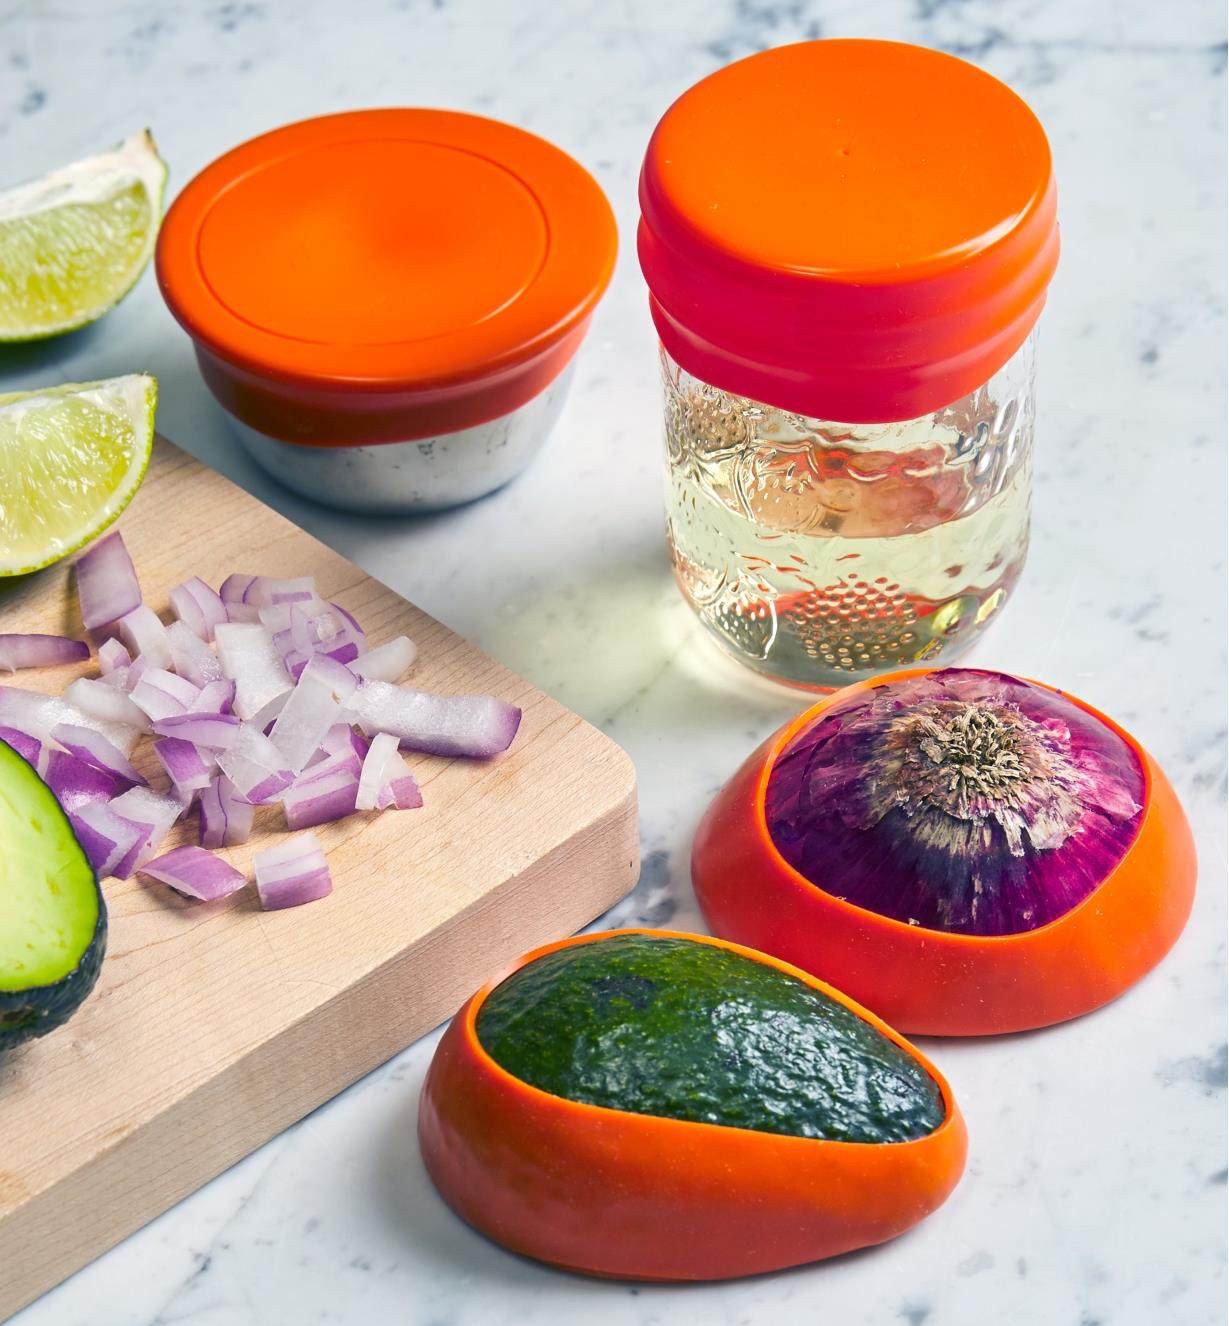 Medium seal caps covering containers and portions of an onion and an avocado